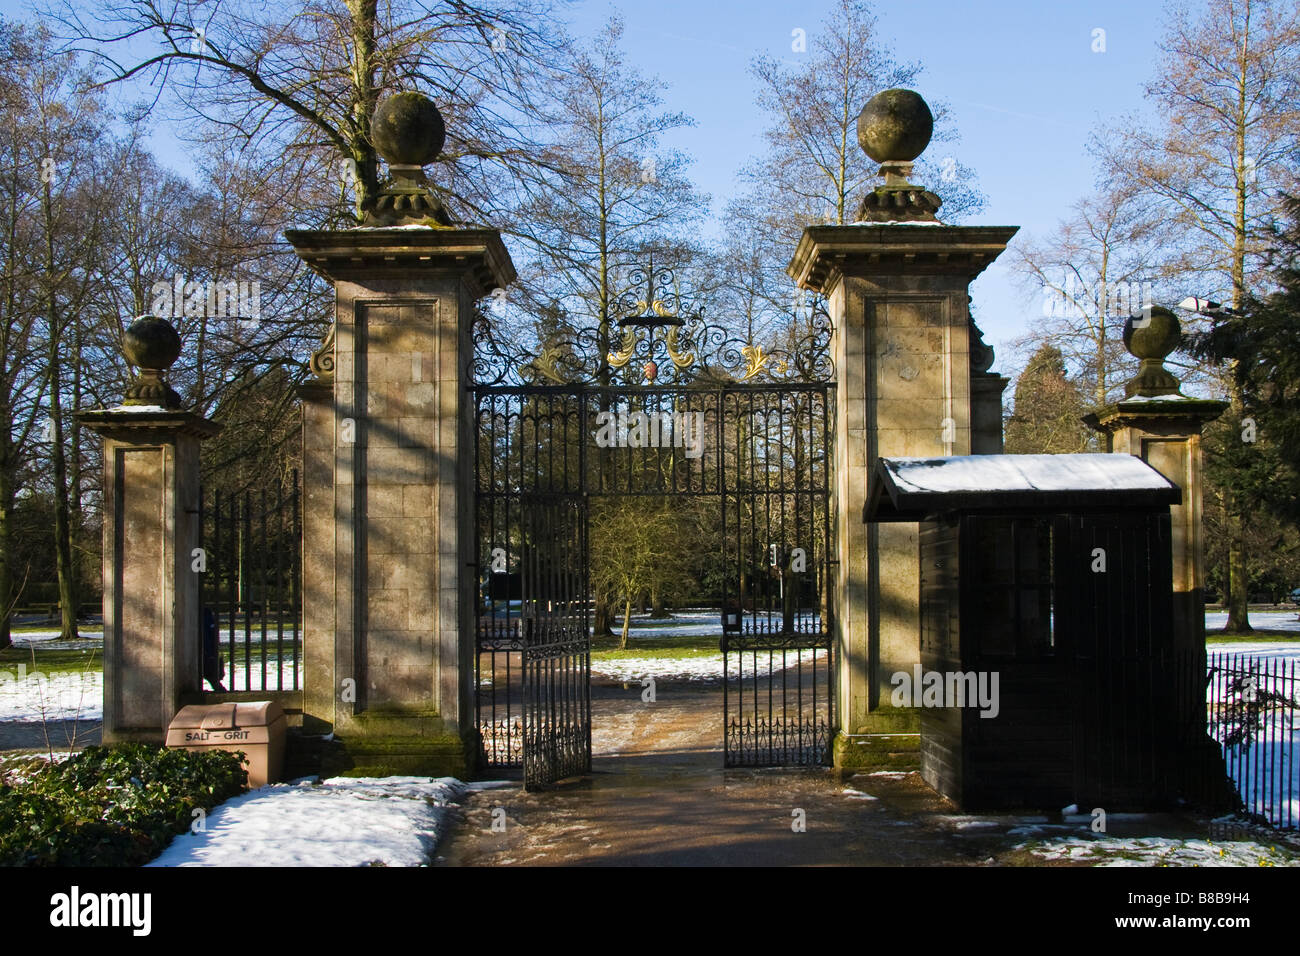 'Clare College' gate in 'The Backs', Cambridge, England, UK. Stock Photo